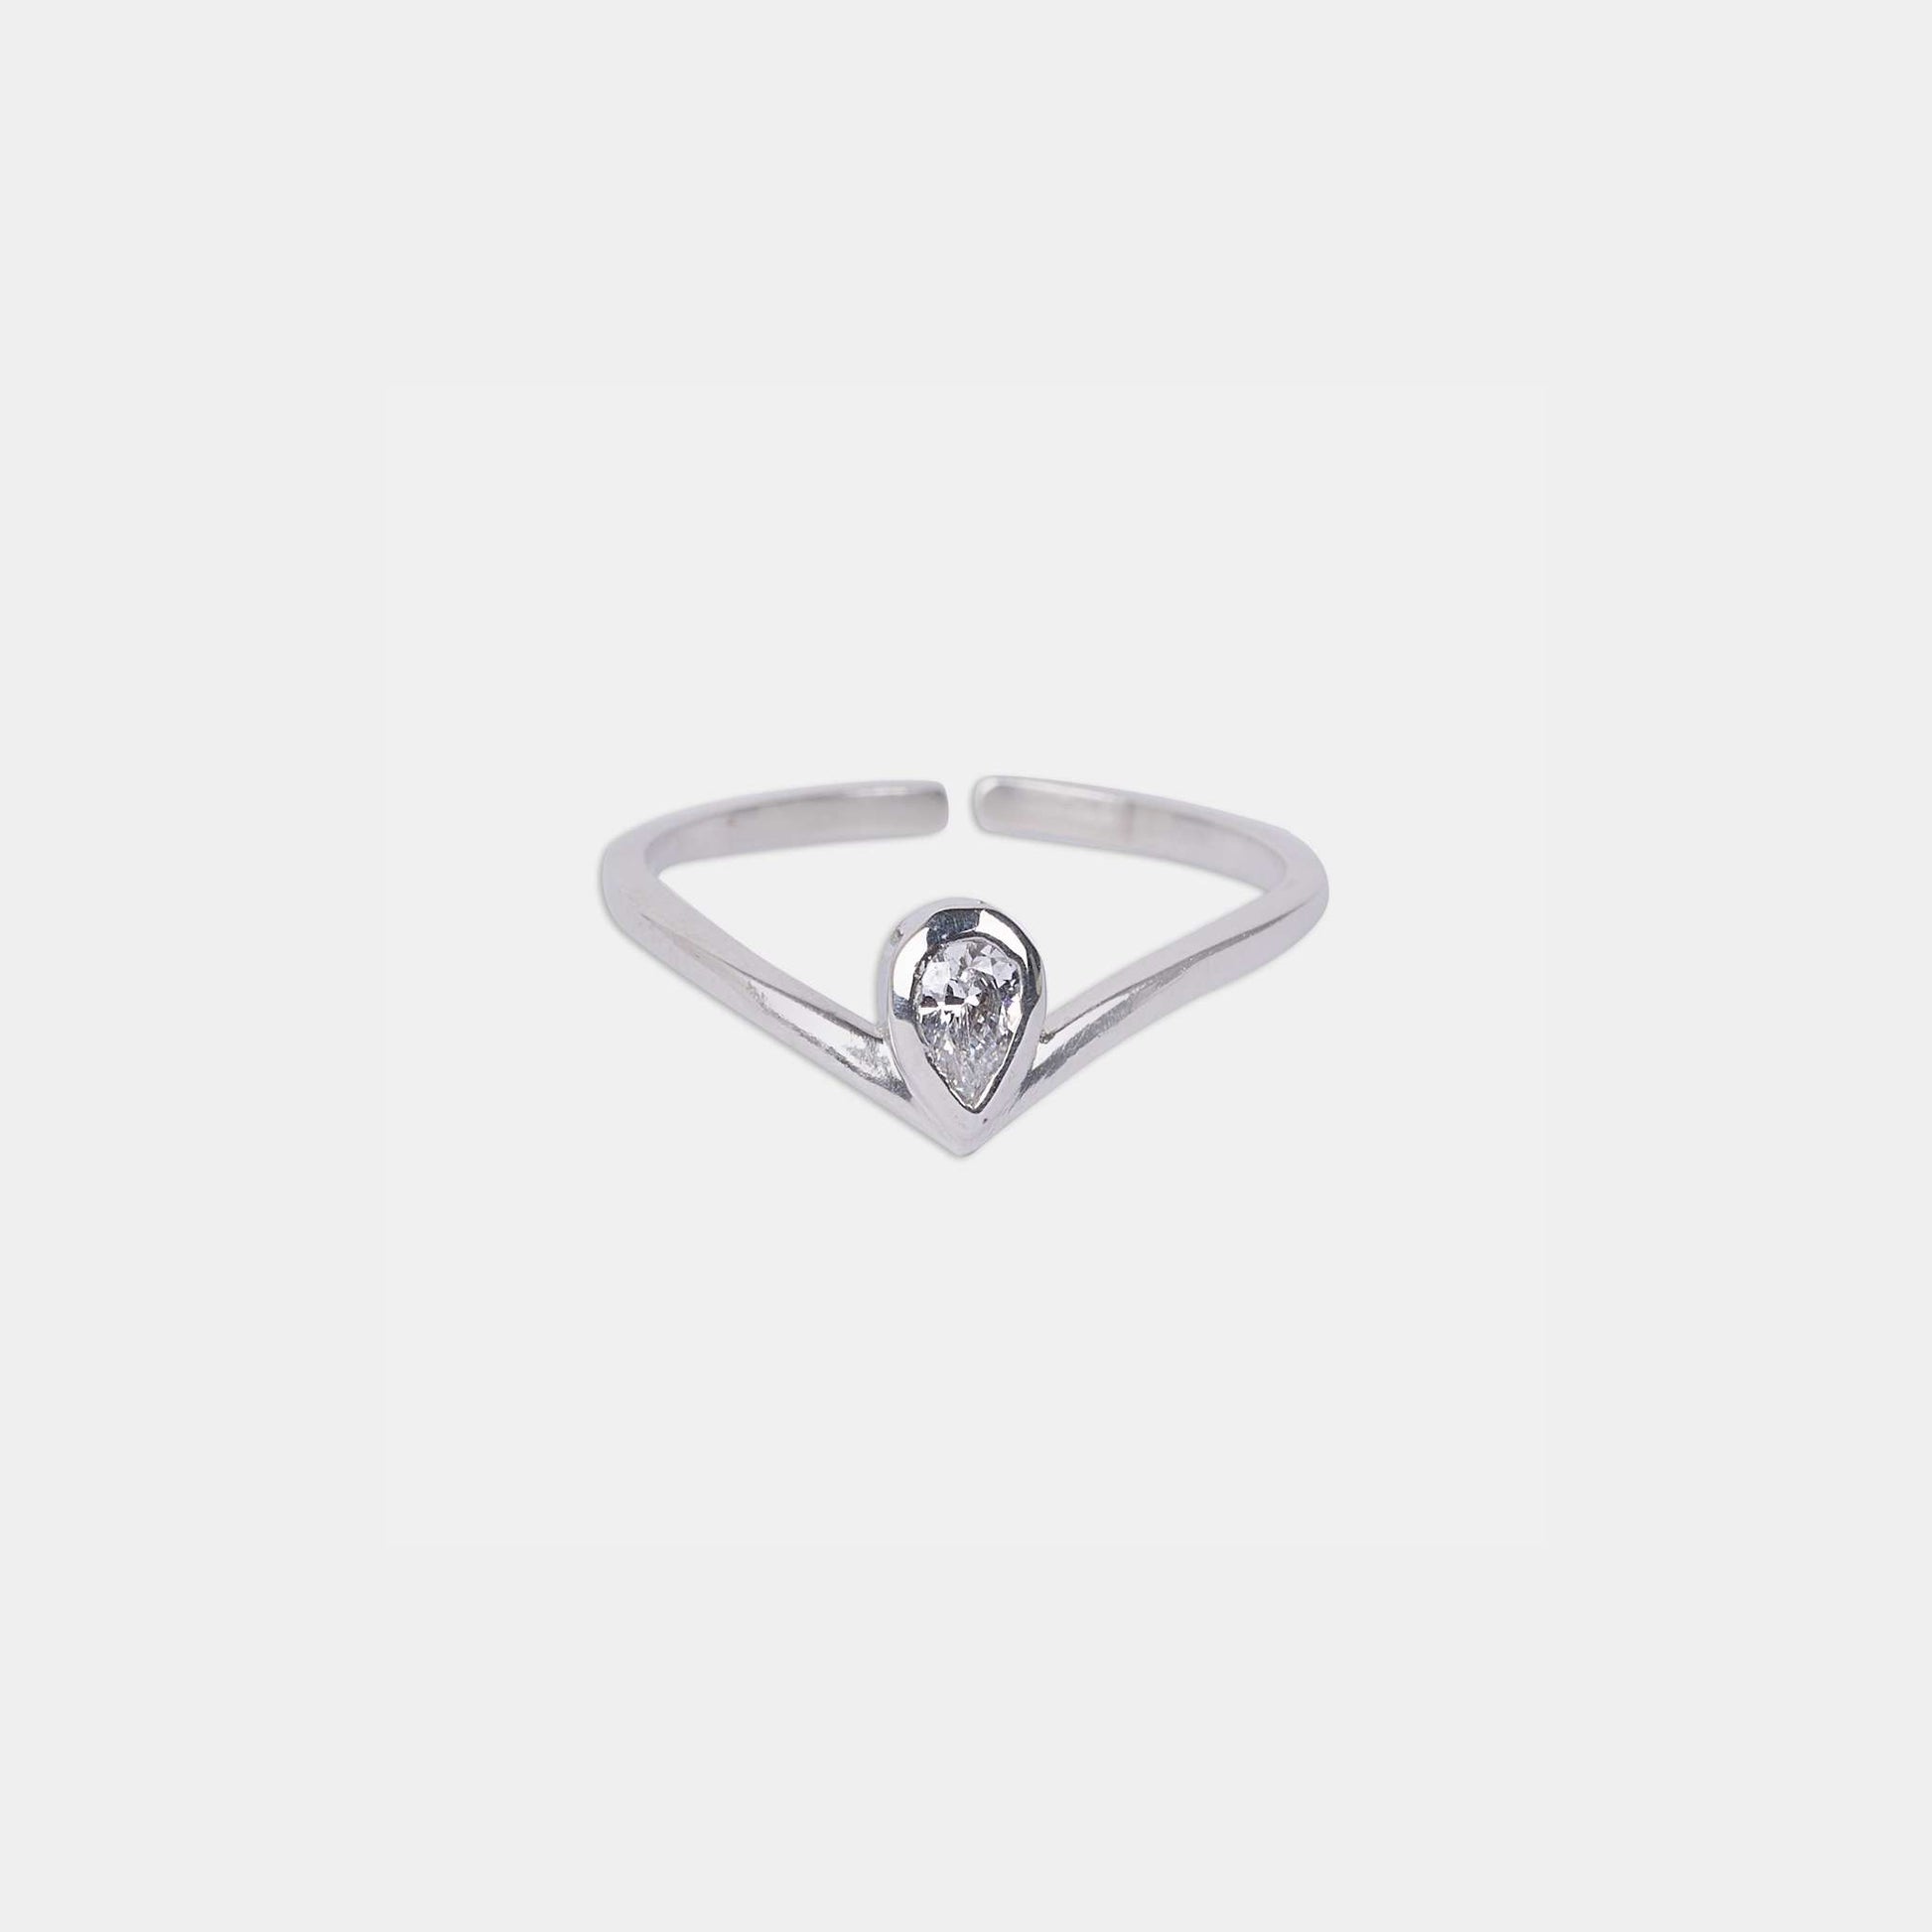 Discover elegance and romance with our exquisite sterling silver ring adorned with a heart-shaped diamond.